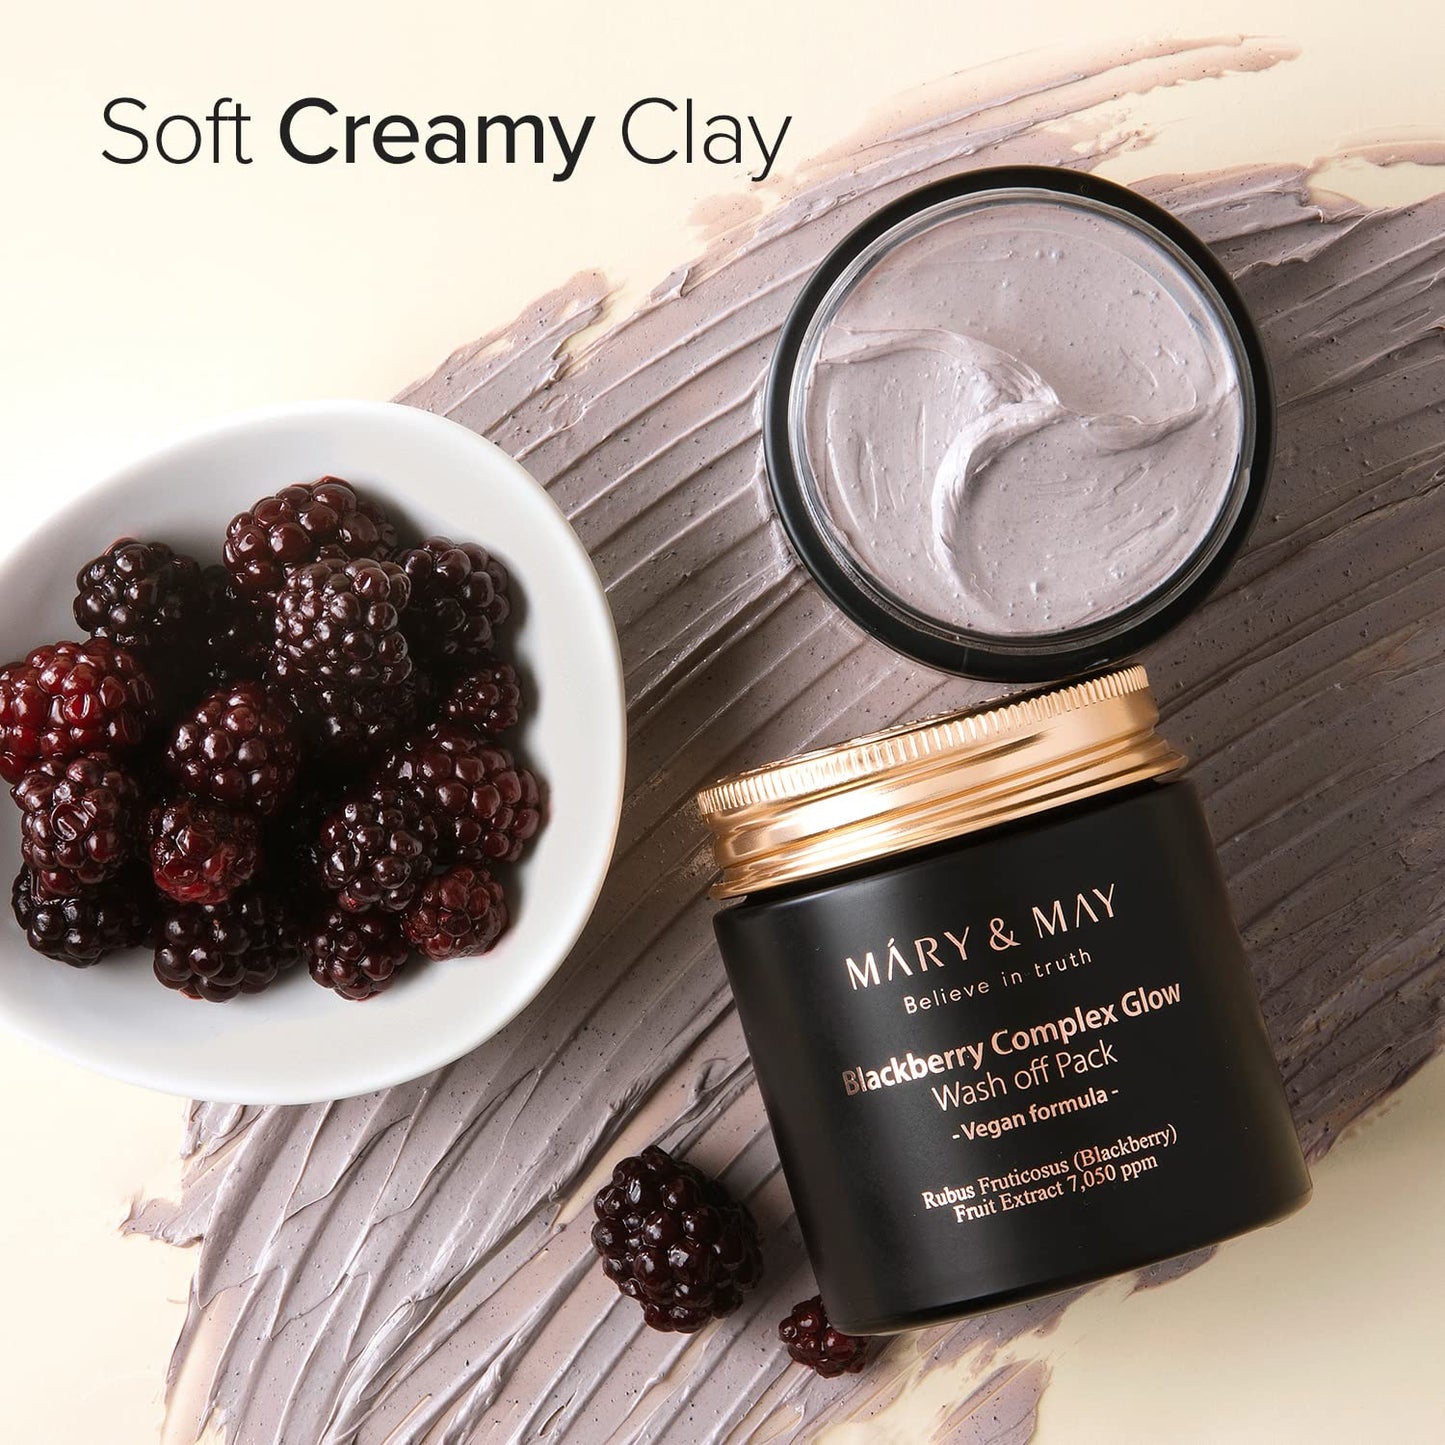 Mary & May Blackberry Complex Glow Wash Off Pack 125g